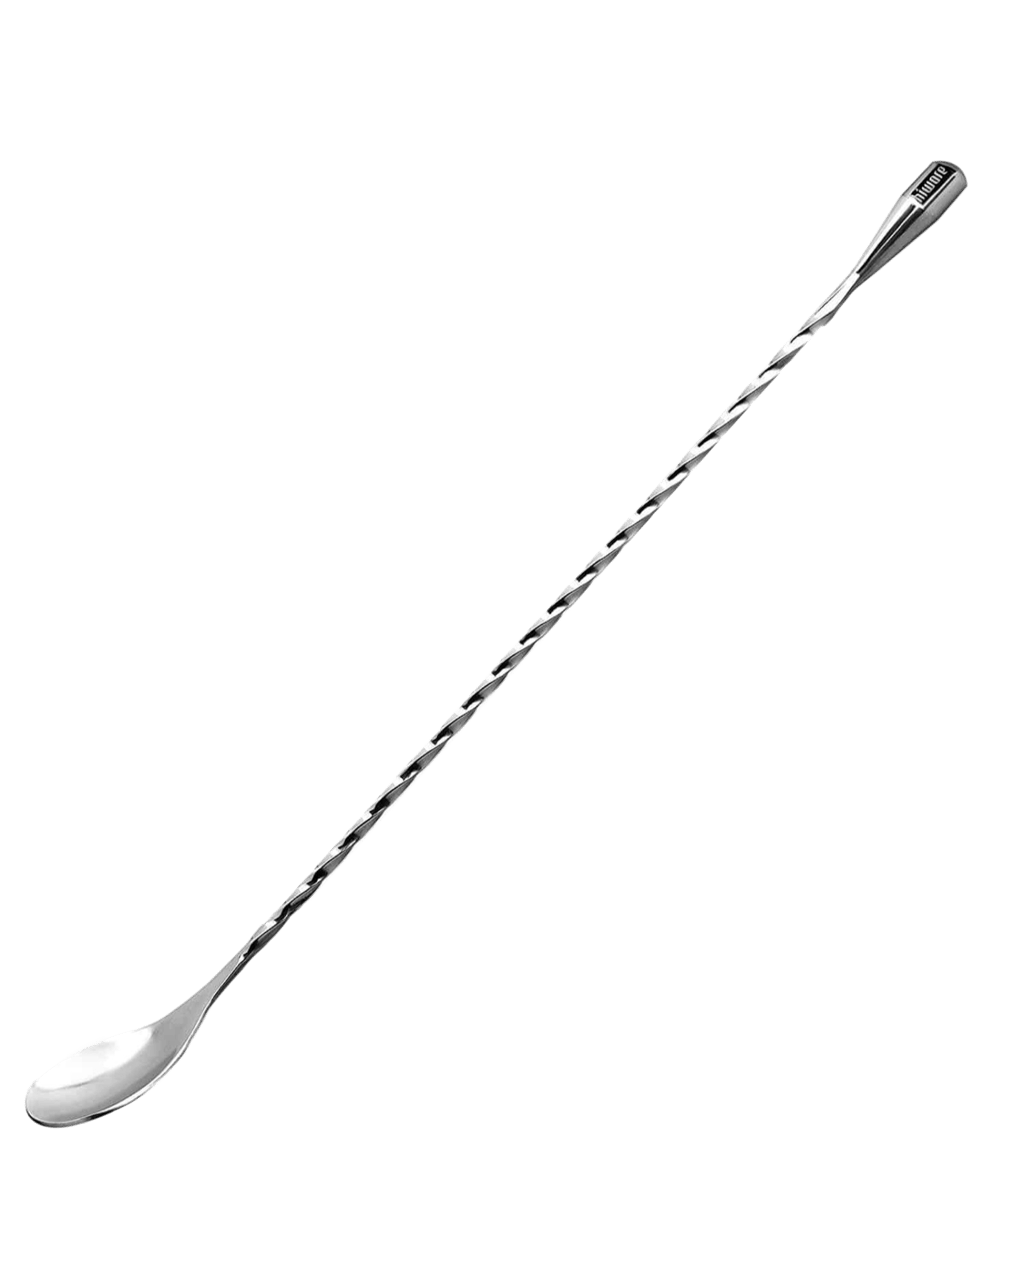 Silver ZACI spoon 2pcs Mixing Spoon Stainless Steel Bar Spoon Cocktail Long Handle Spoon for Cocktail Shakers Tall Cups 